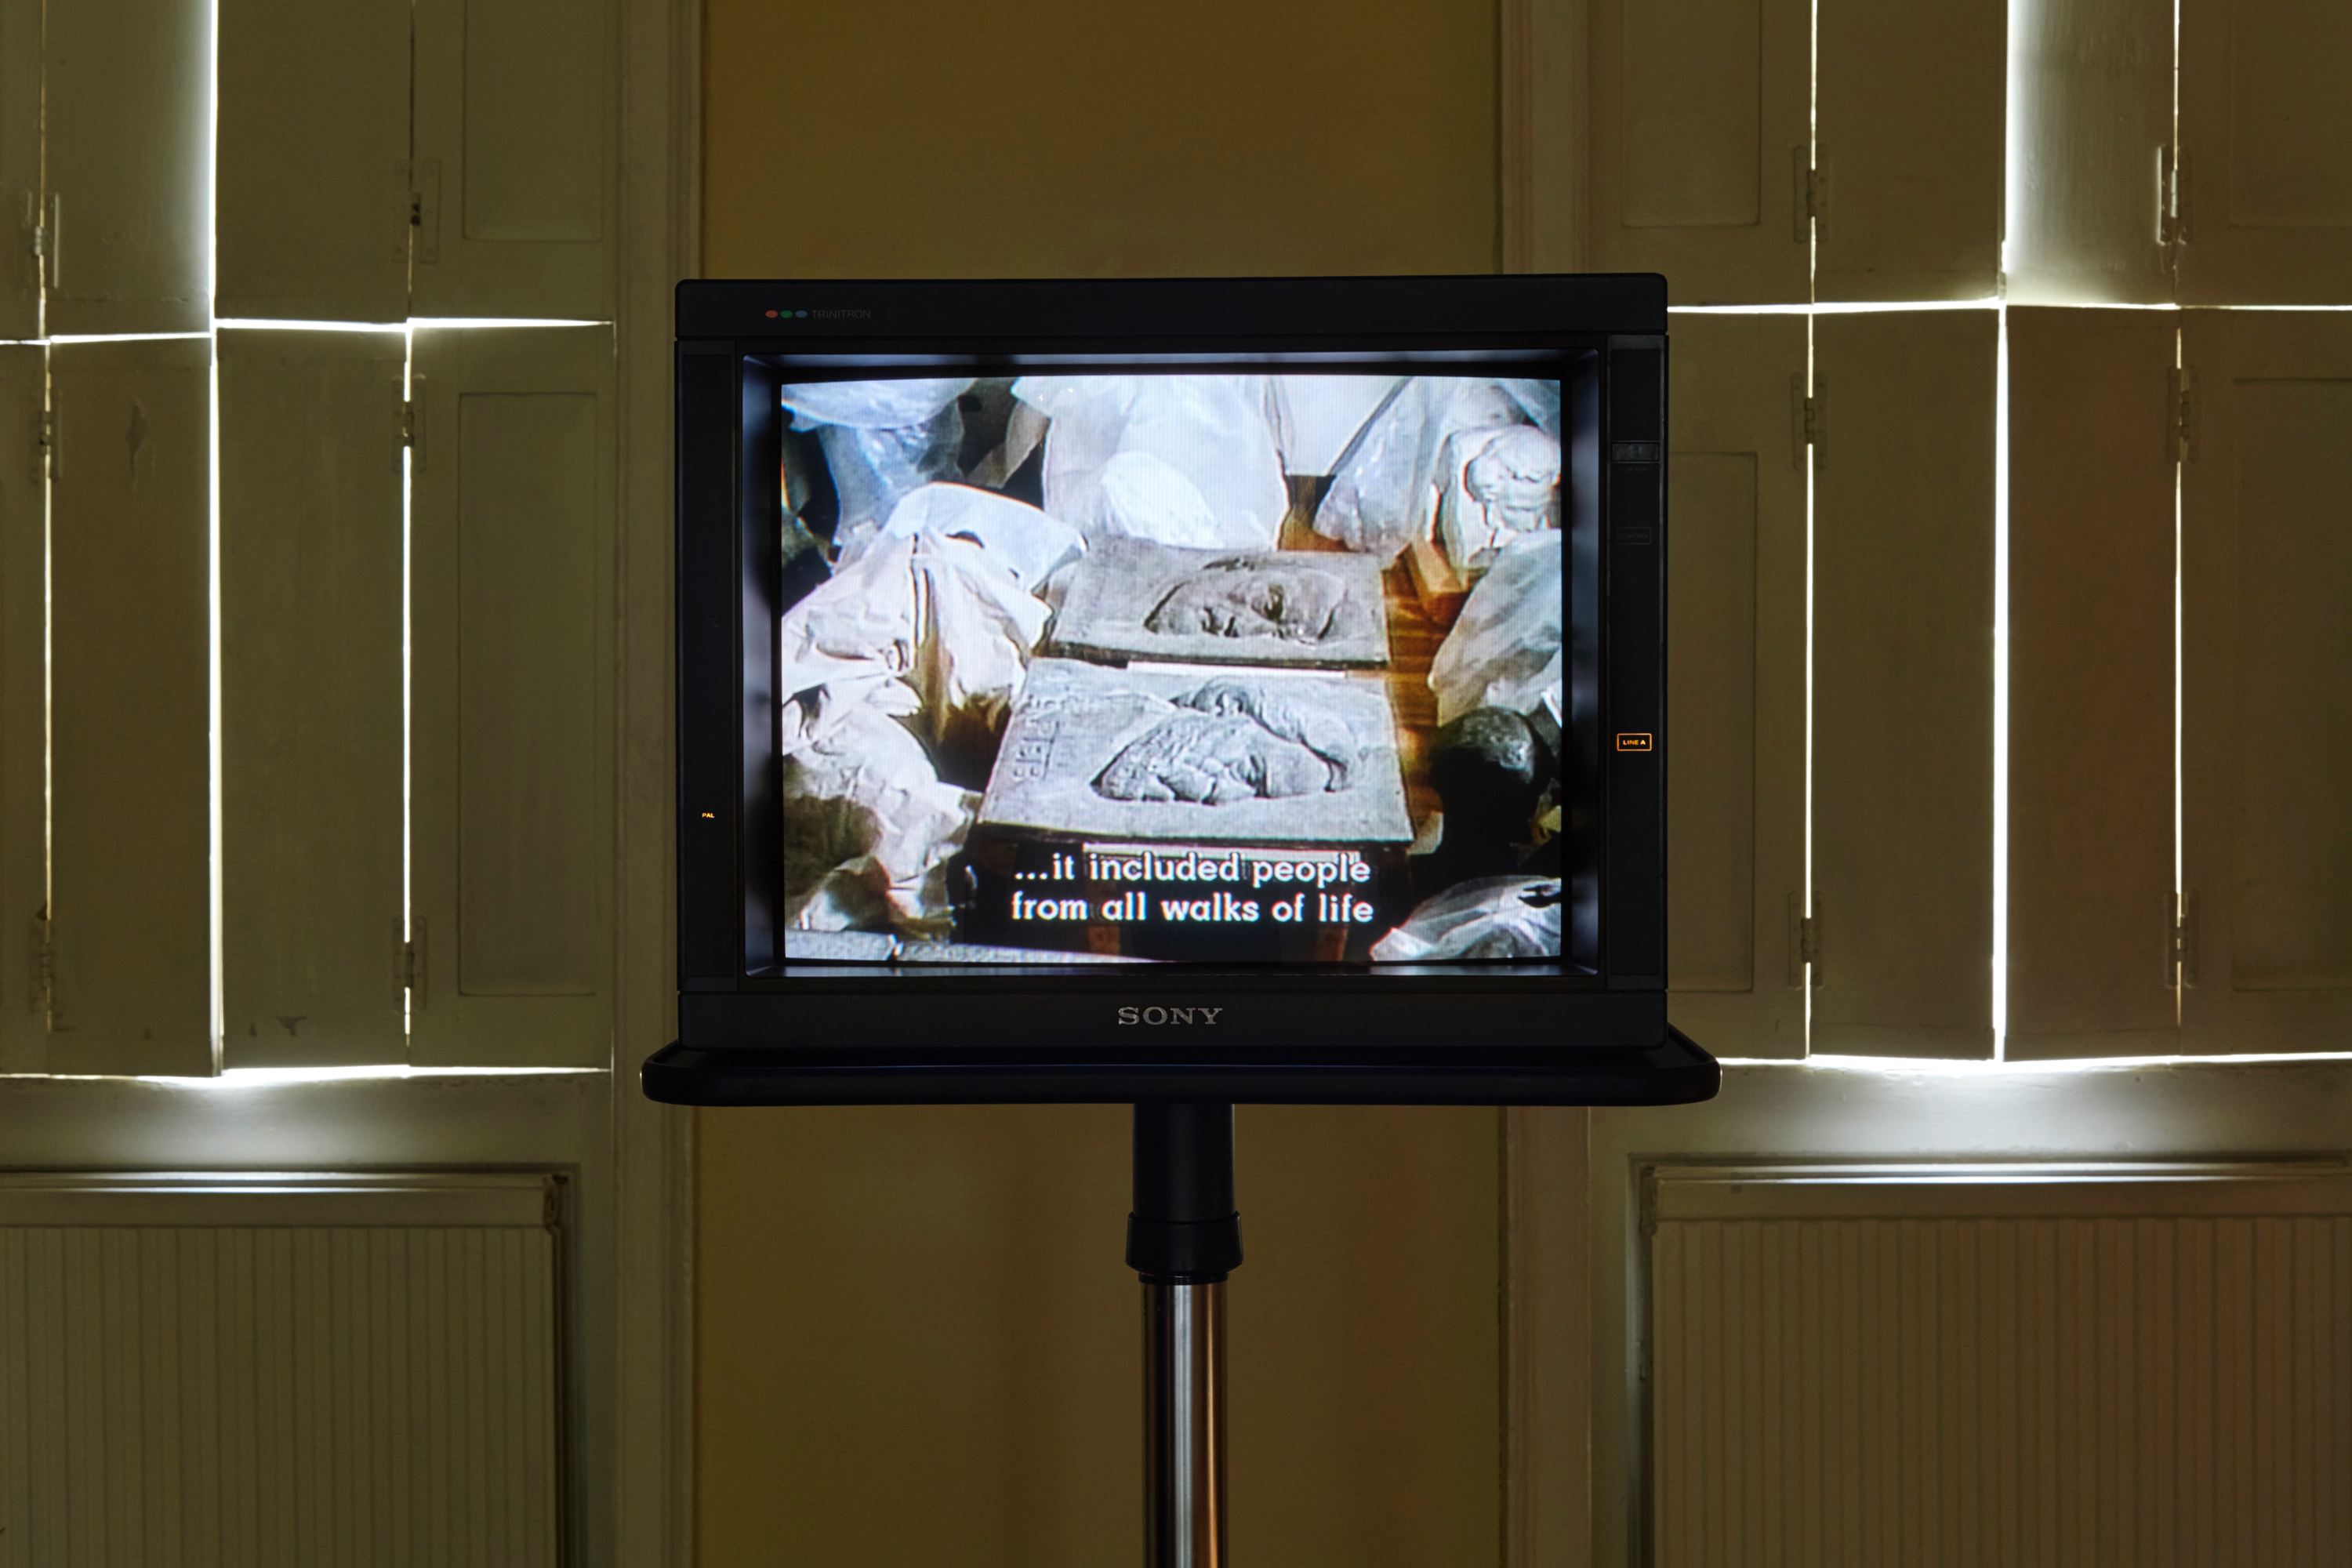 Mark Lewis & Laura Mulvey, ‘Disgraced Monuments’, 1993, Super 16mm transferred to digi- betacam and DVD, 49 mins. Installation view